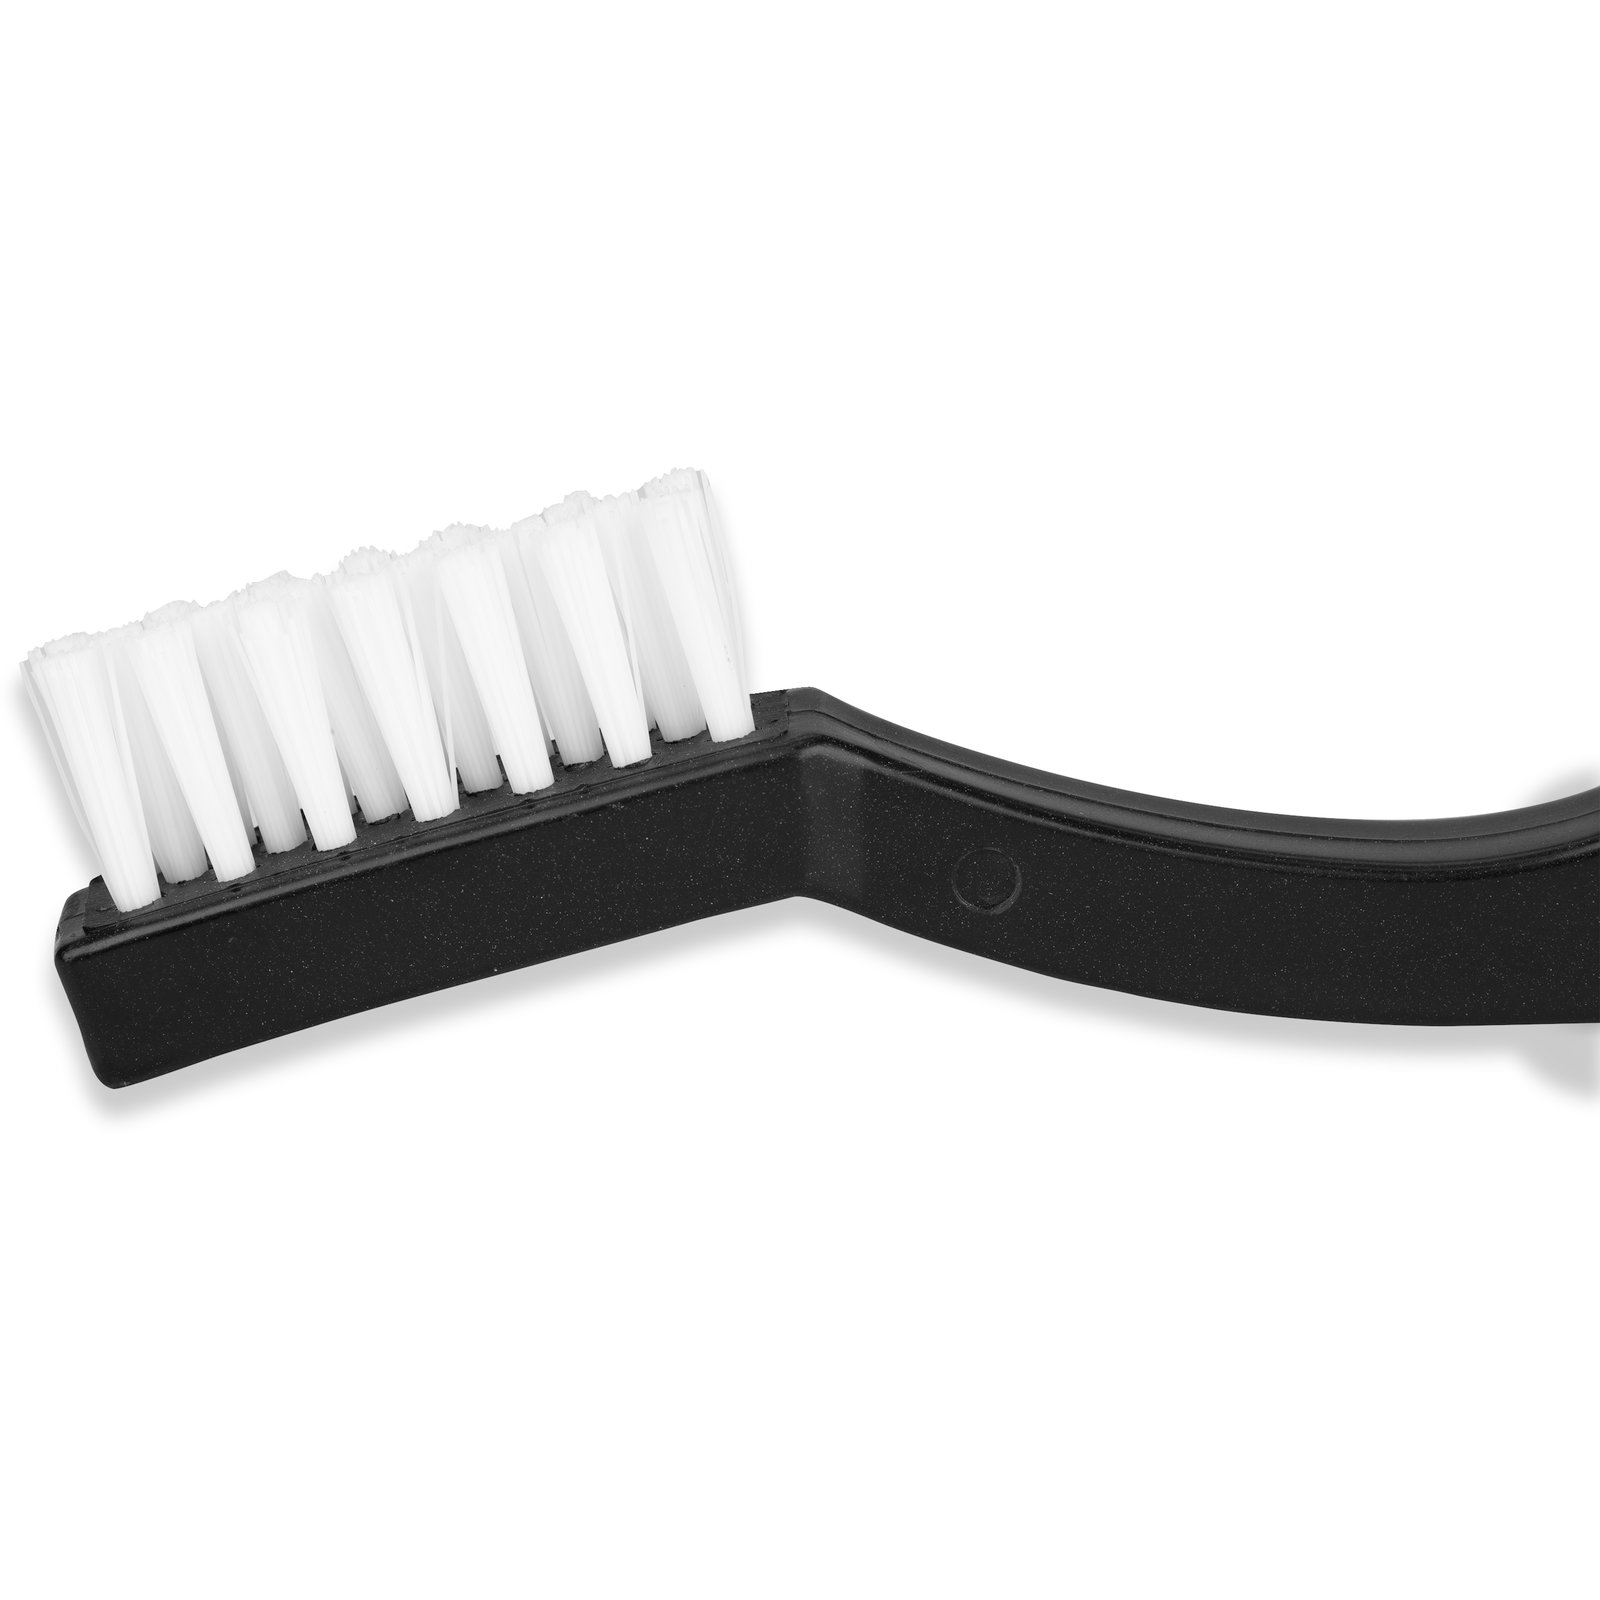 Small Utility Brush - Toothbrush Style